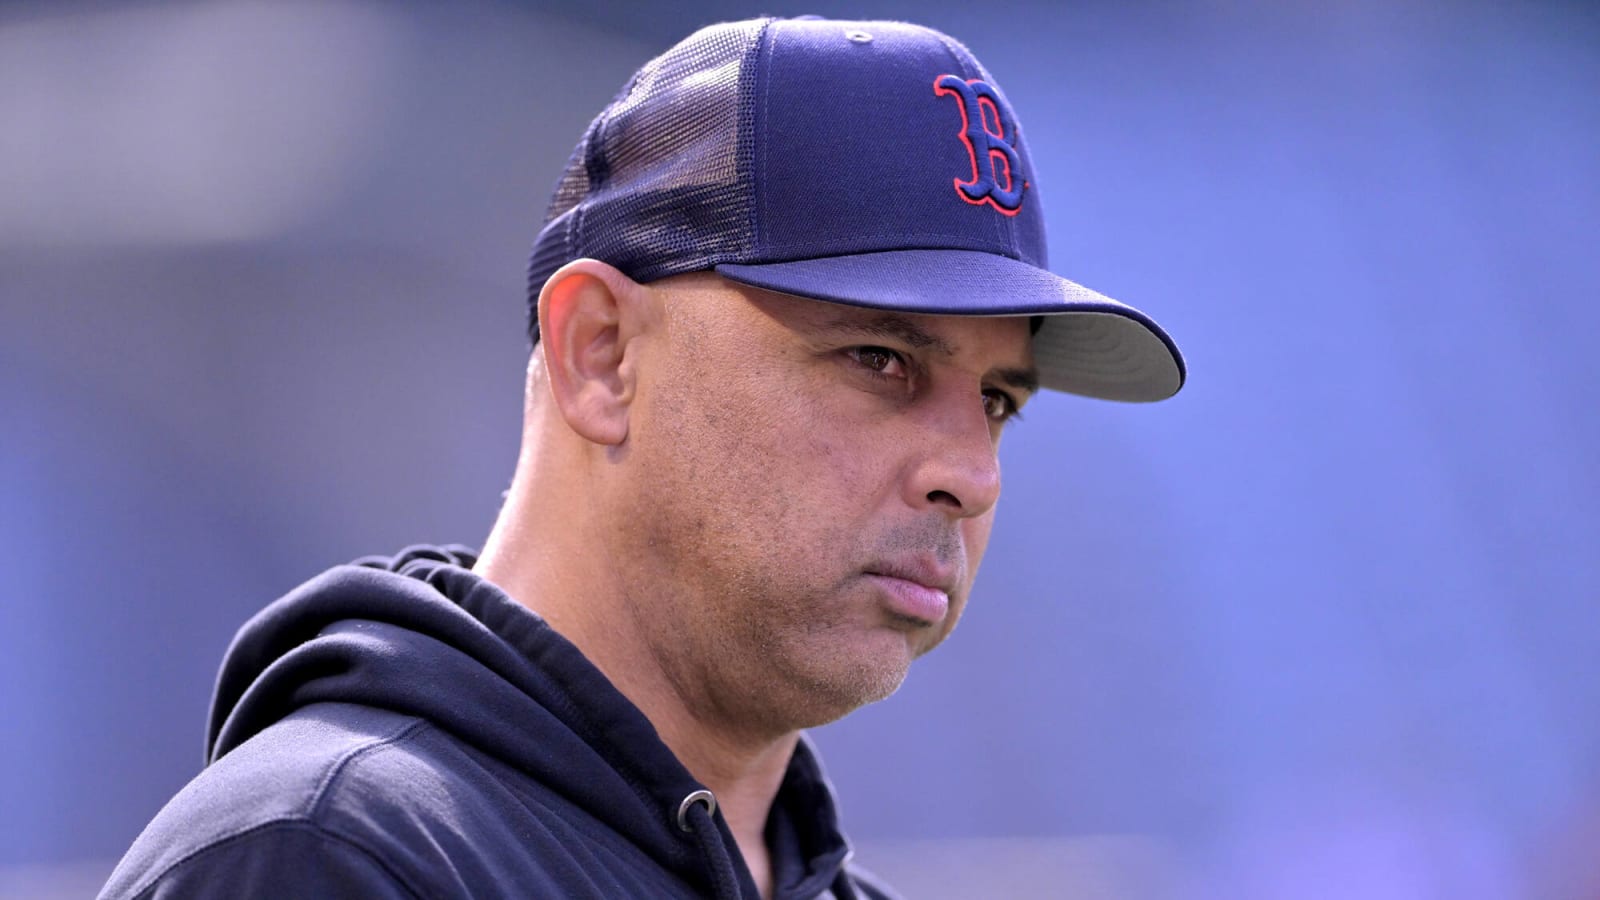 Red Sox manager has surprising criticism of ESPN